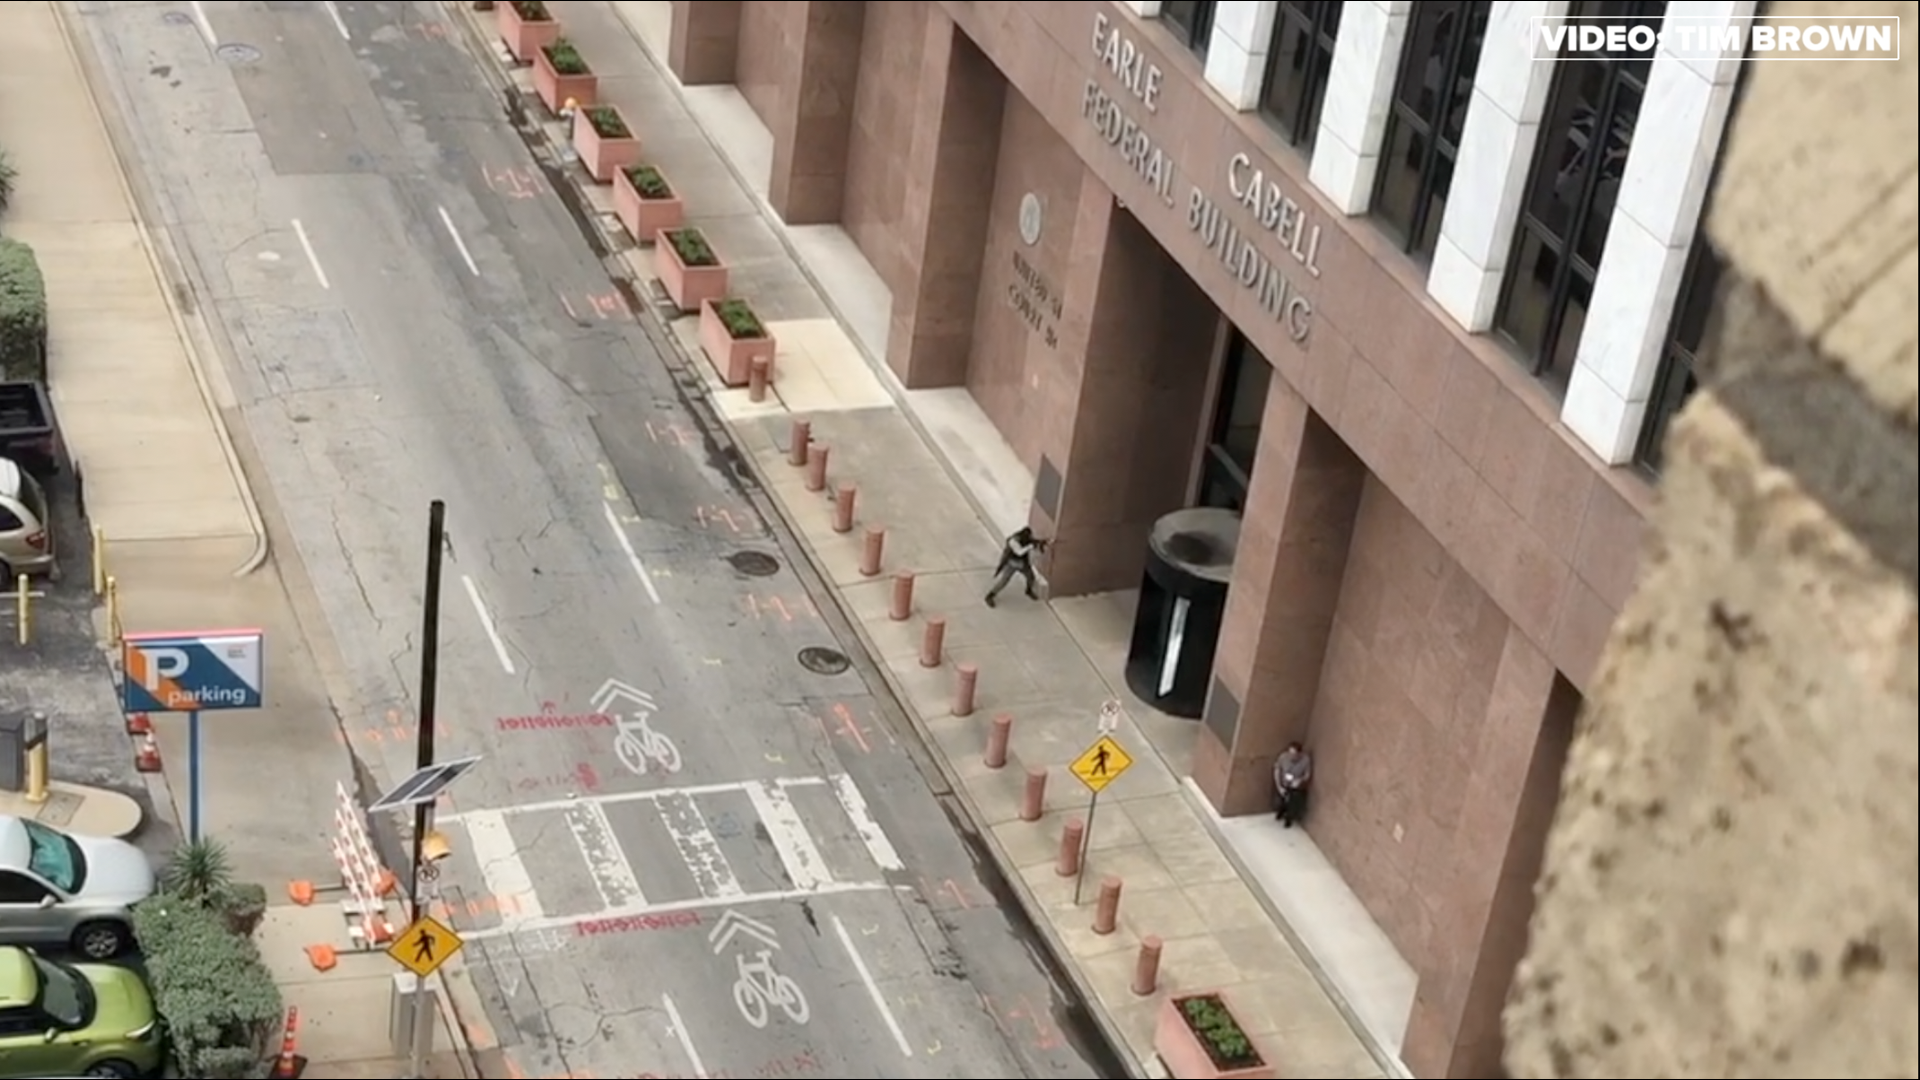 Officers responded to a shooting call before 8:50 a.m. Monday outside the federal courthouse in downtown Dallas.